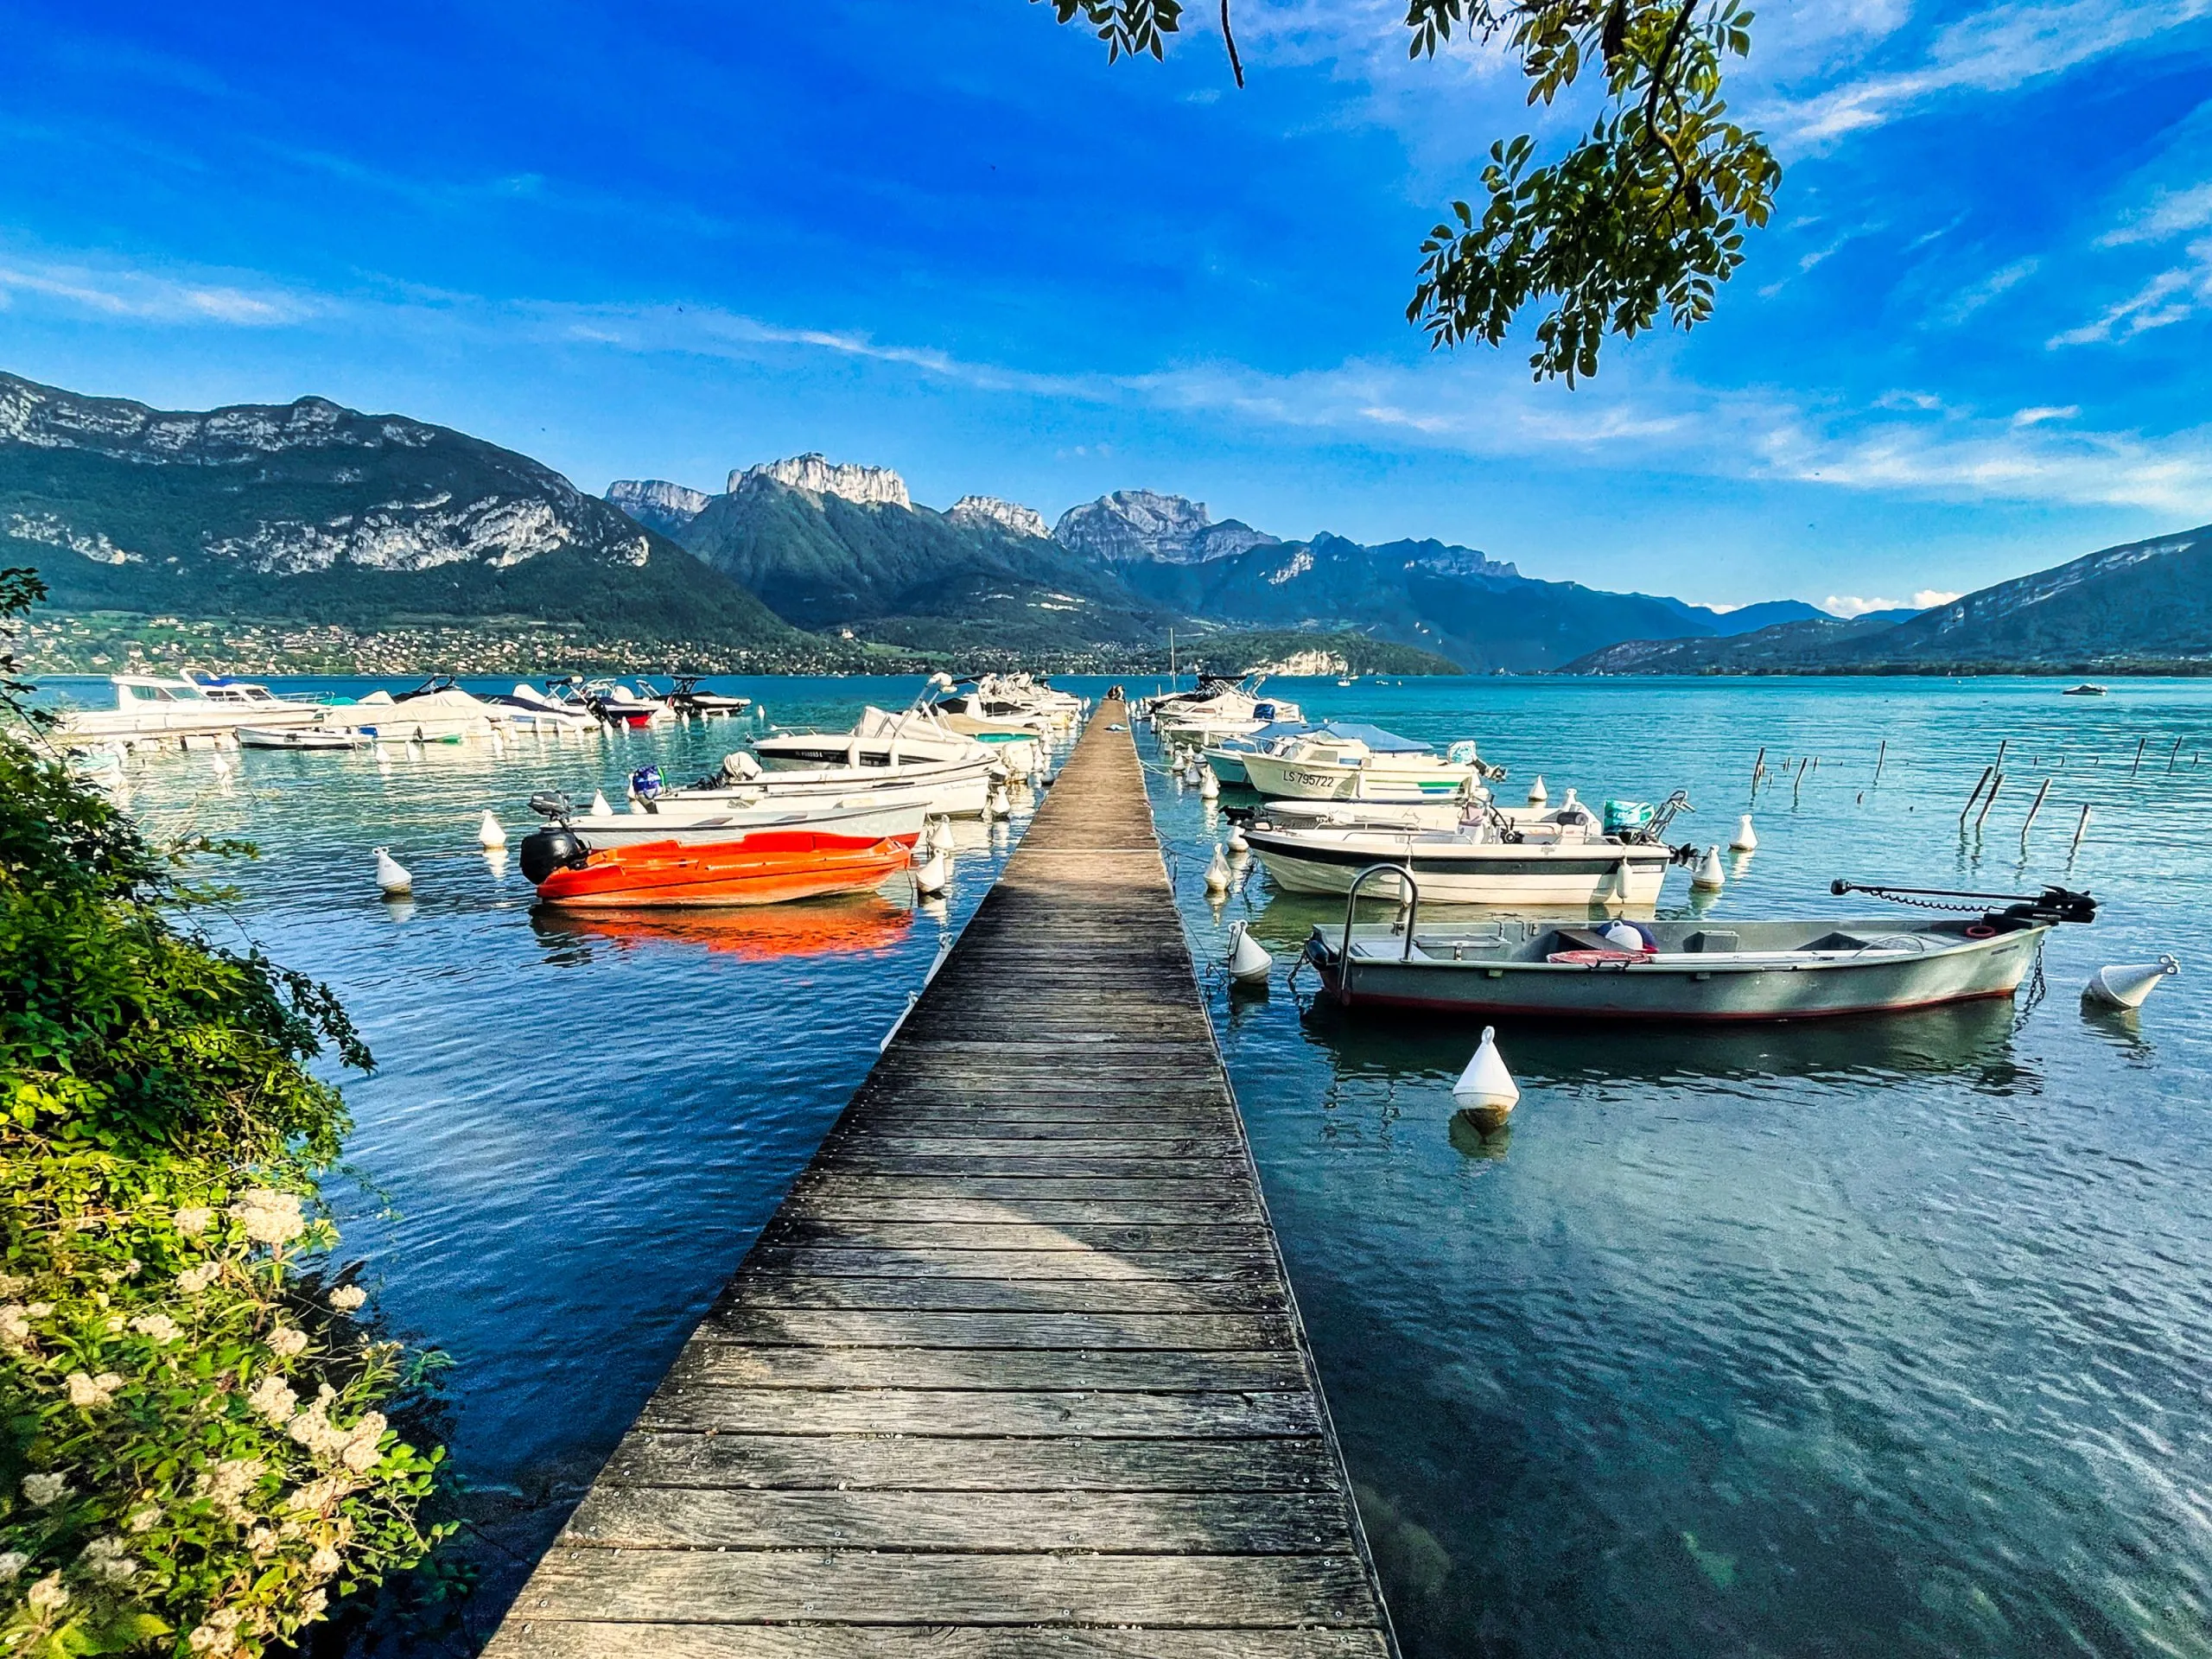 Annecy, France - October 01 2021 : a pier or jetty with luxury boats along the cristal clear alpine lake